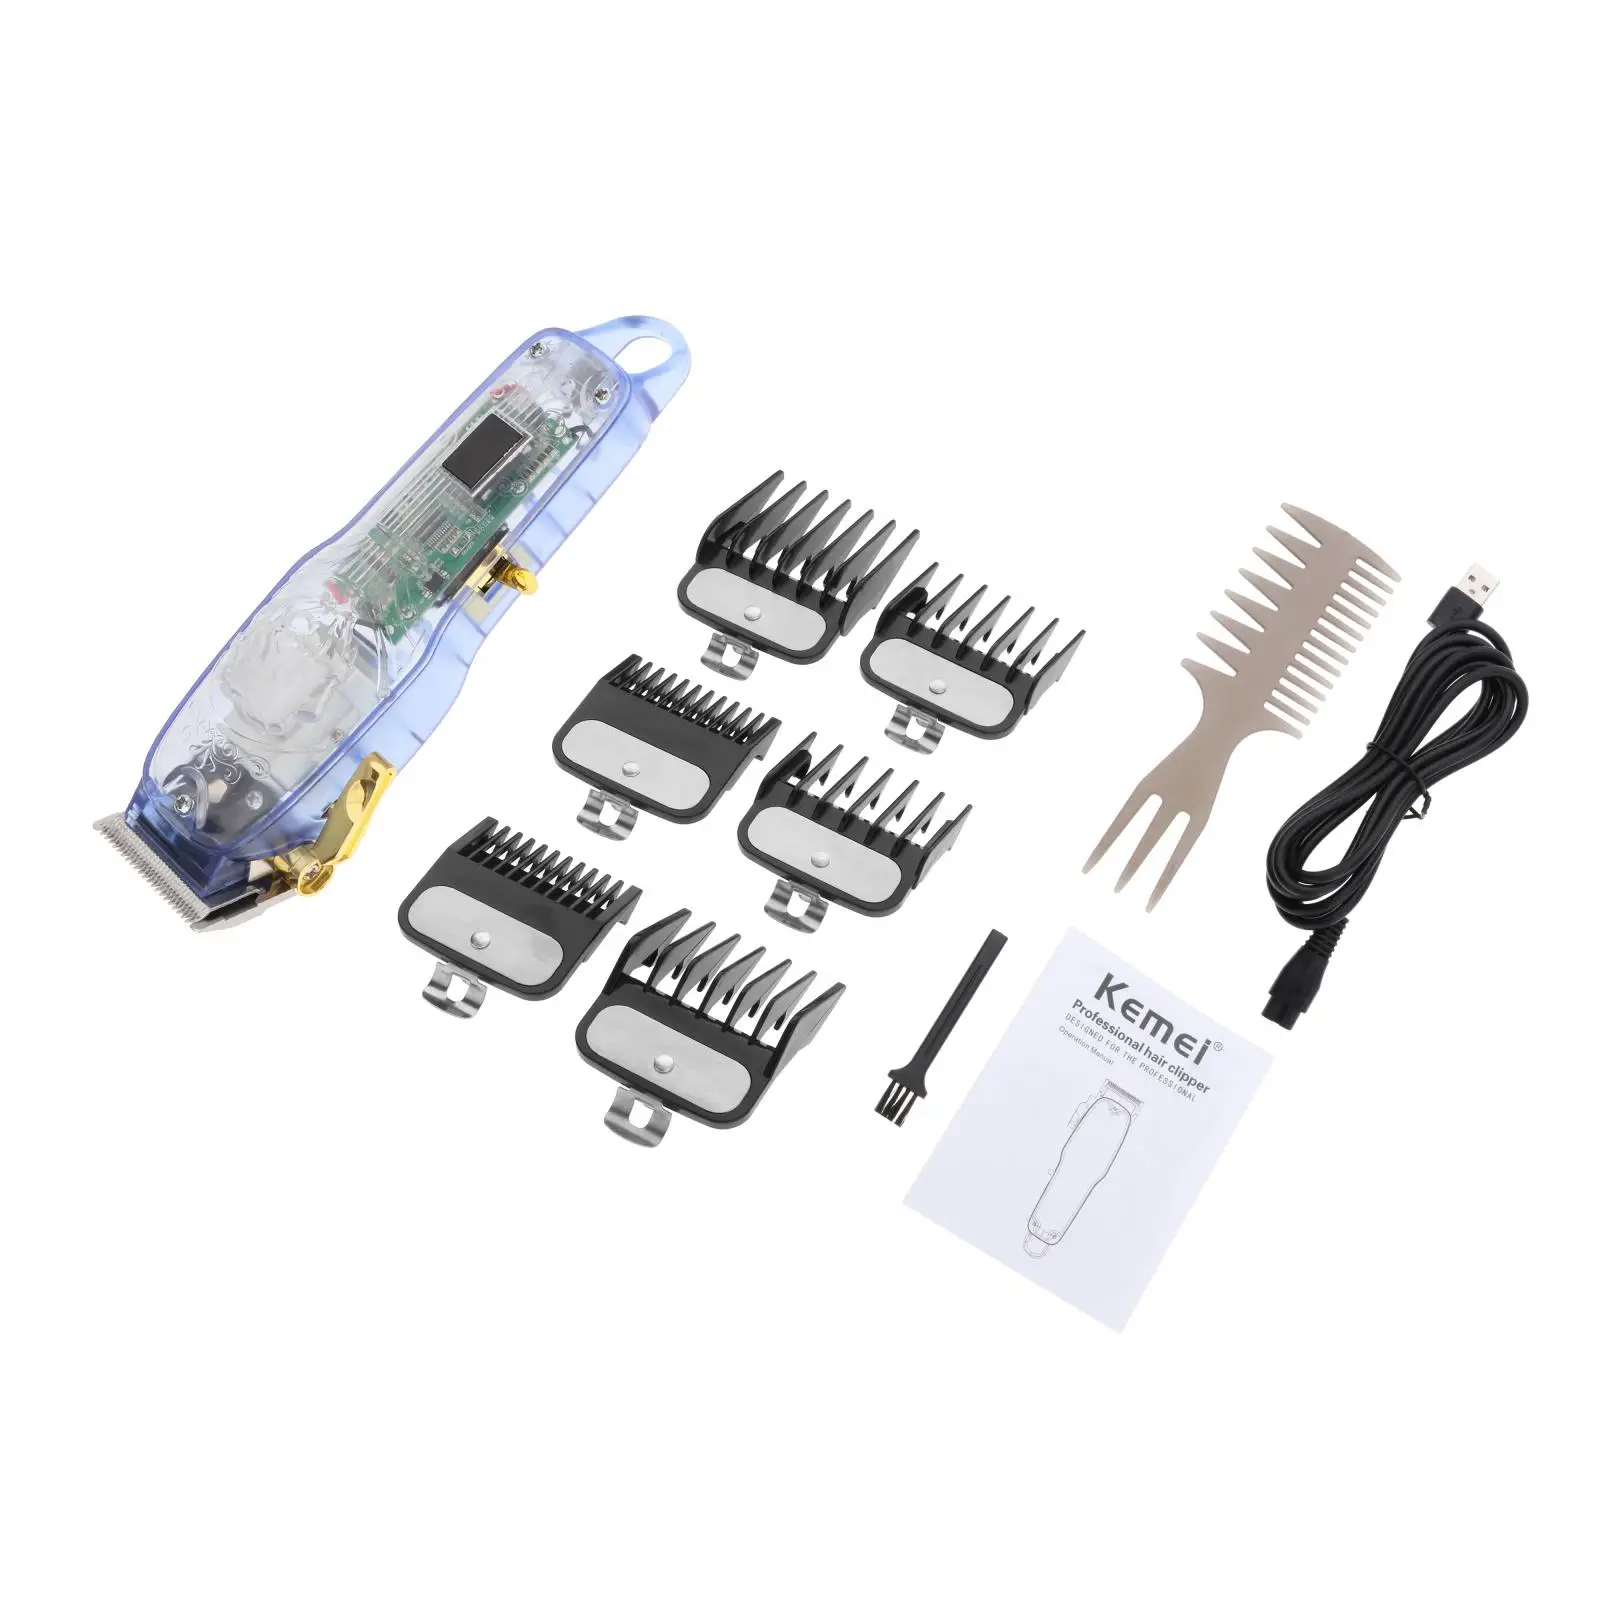 Pro Hair Trimmer Clippers Shaving Machine Cutting Beard Cordless Barber Set